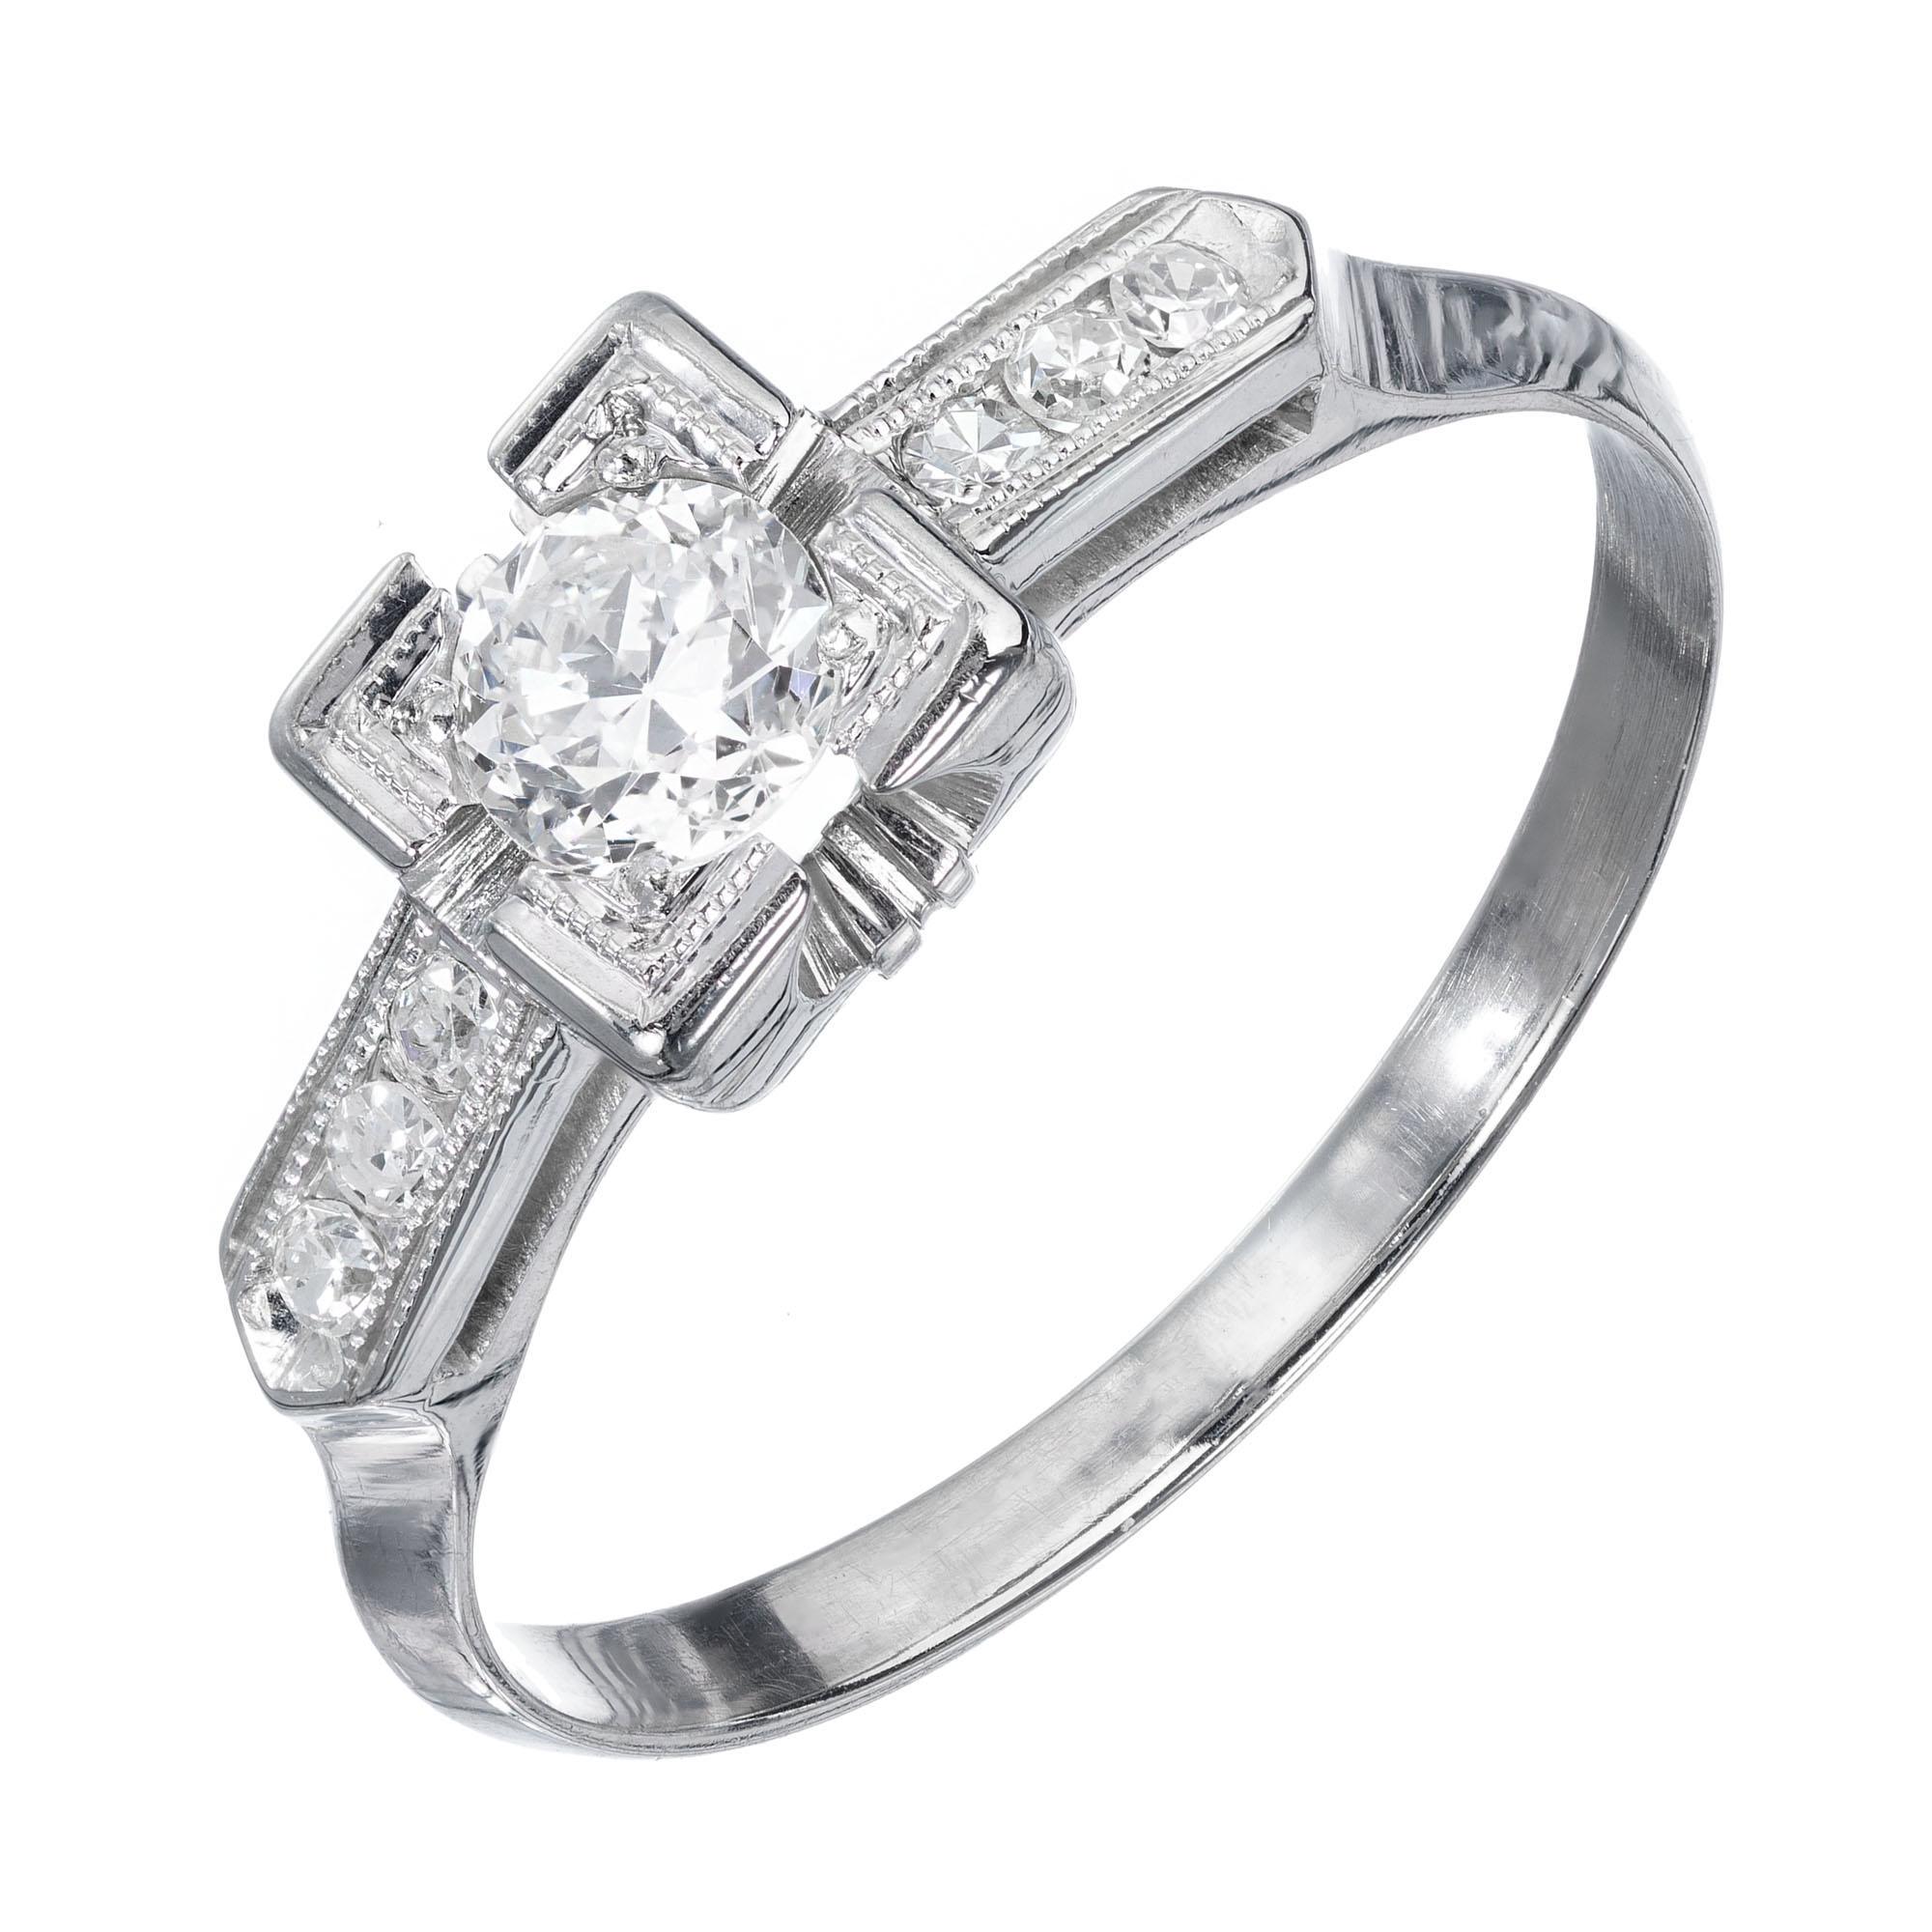 Art Deco diamond engagement ring. EGL certified center diamond set in a 18k white gold setting, with six single cut accent diamonds. Circa 1940.

1 0.25ct old European cut F to G color, SI1 clarity, Depth: 62.9% Table: 60%, Ideal cut. EGL